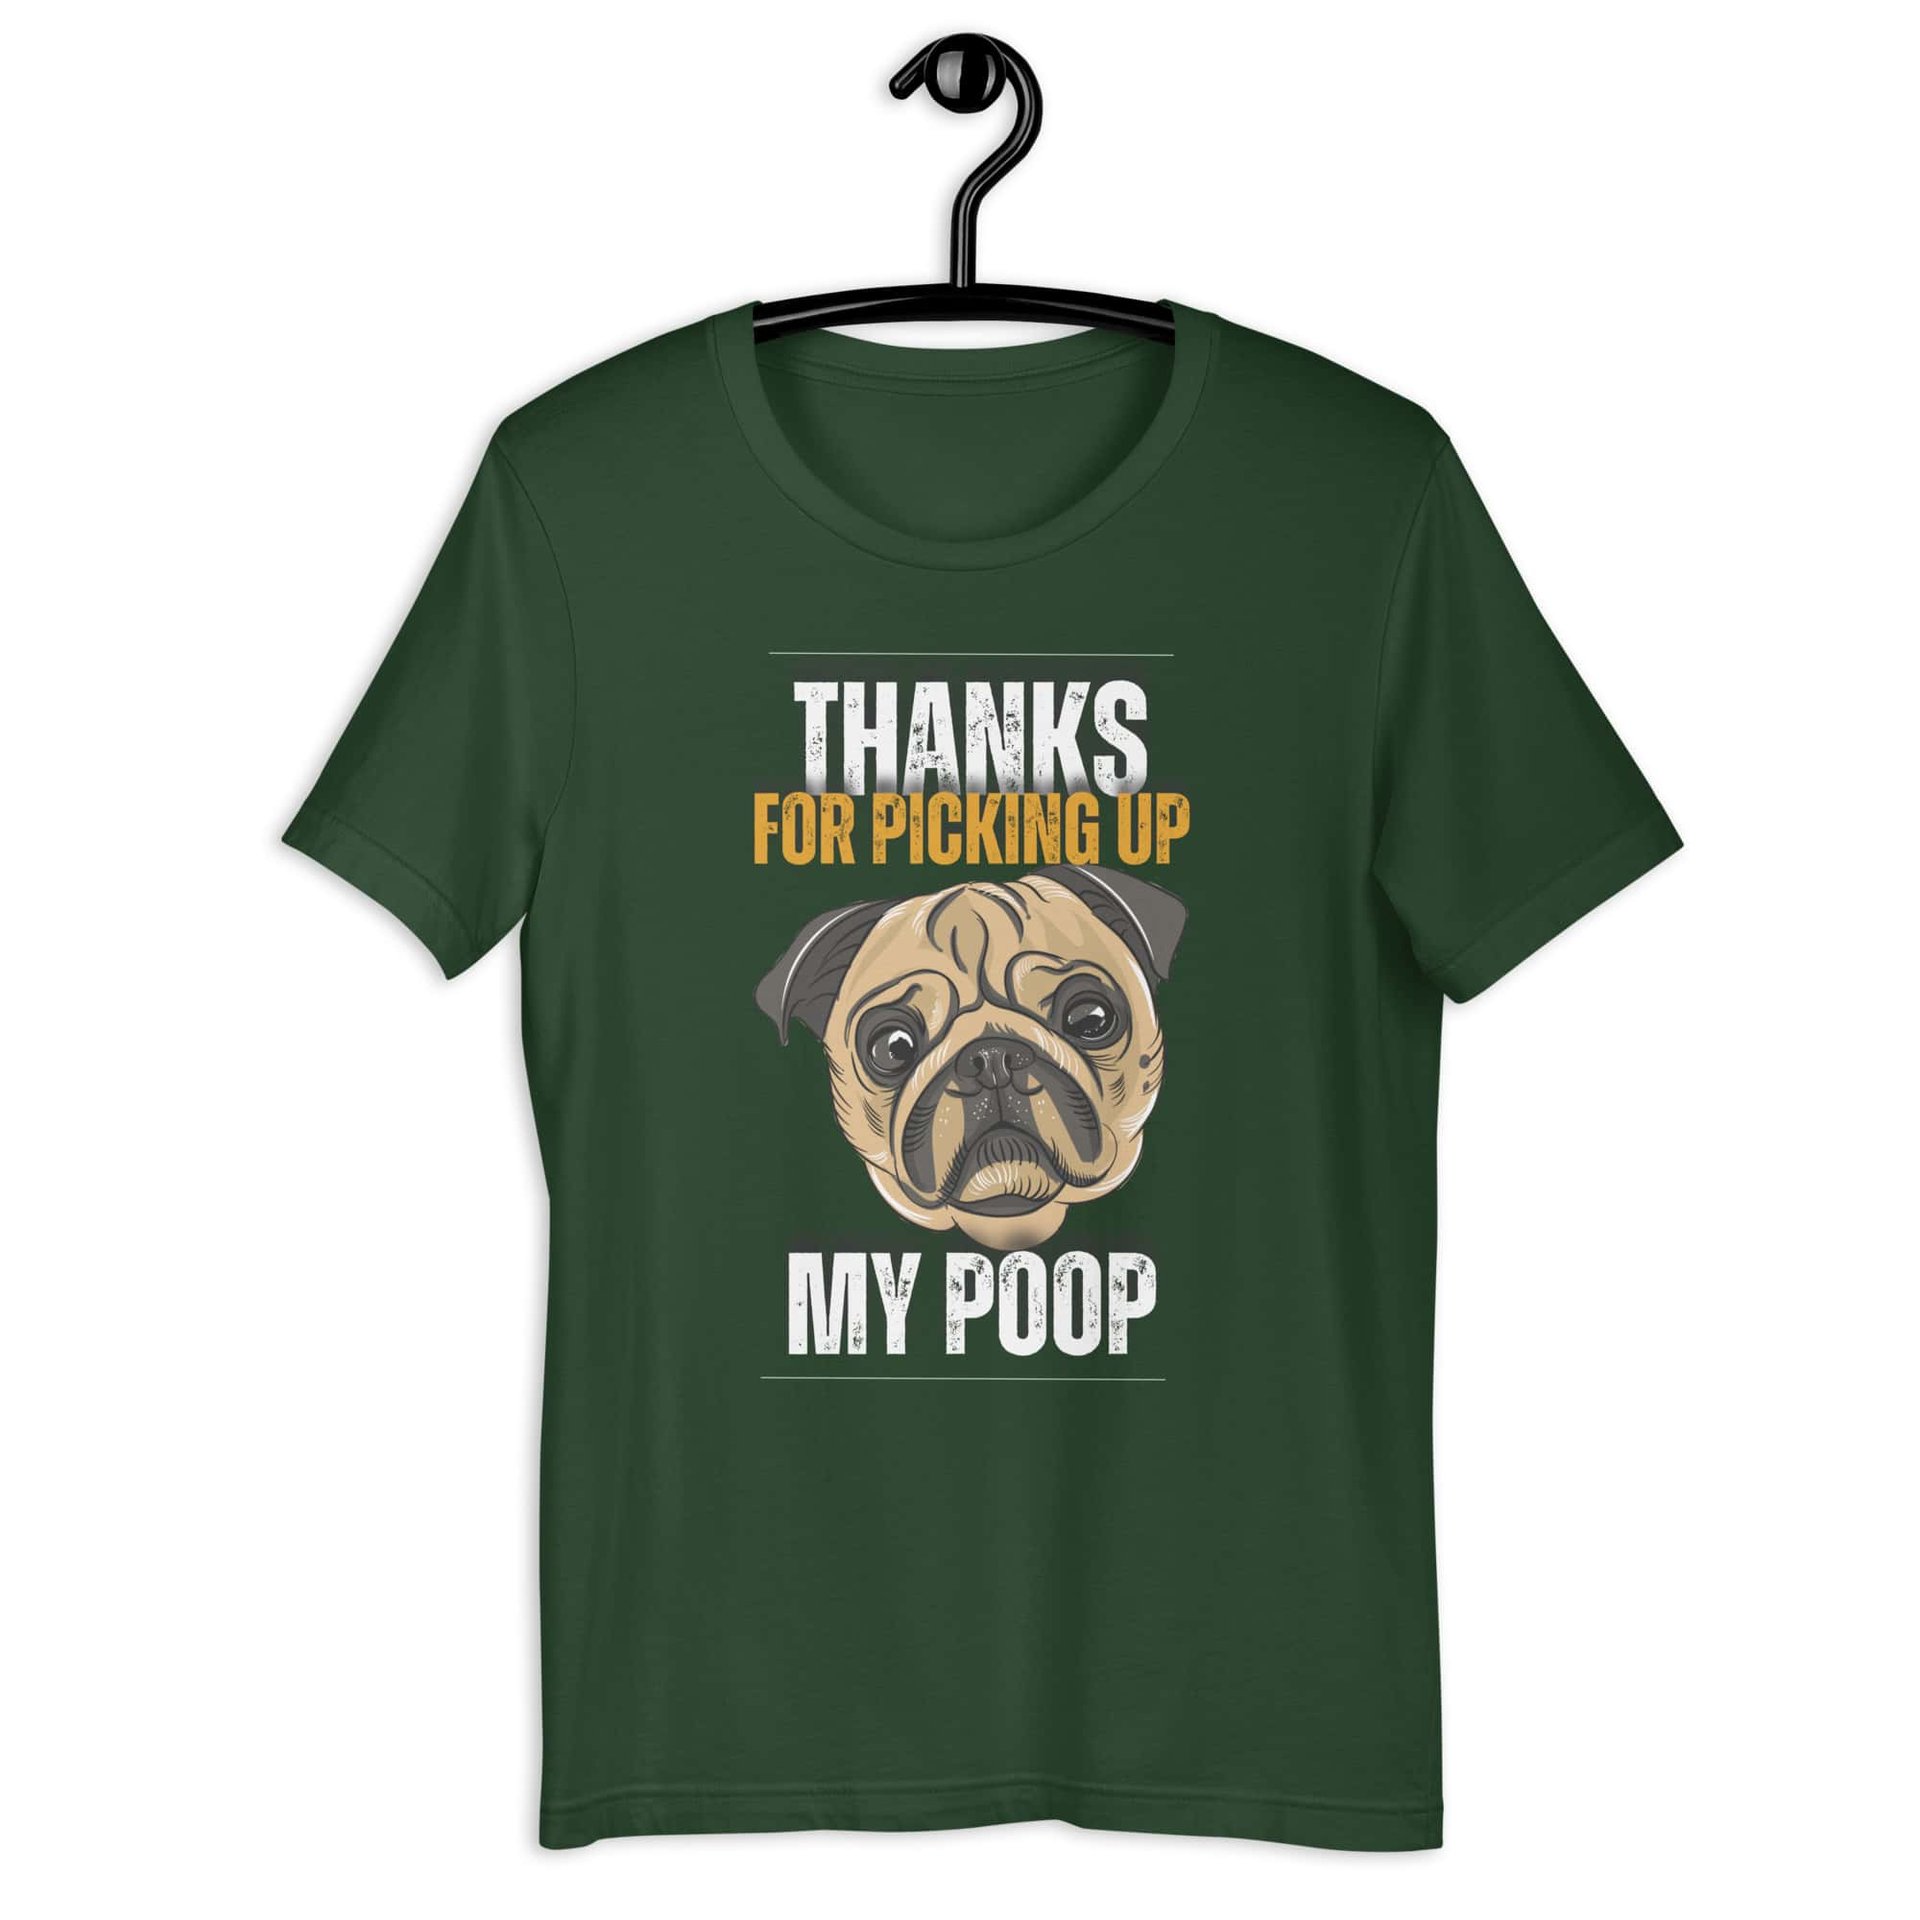 Thanks For Picking Up My POOP Funny Bulldog Unisex T-Shir. Forest